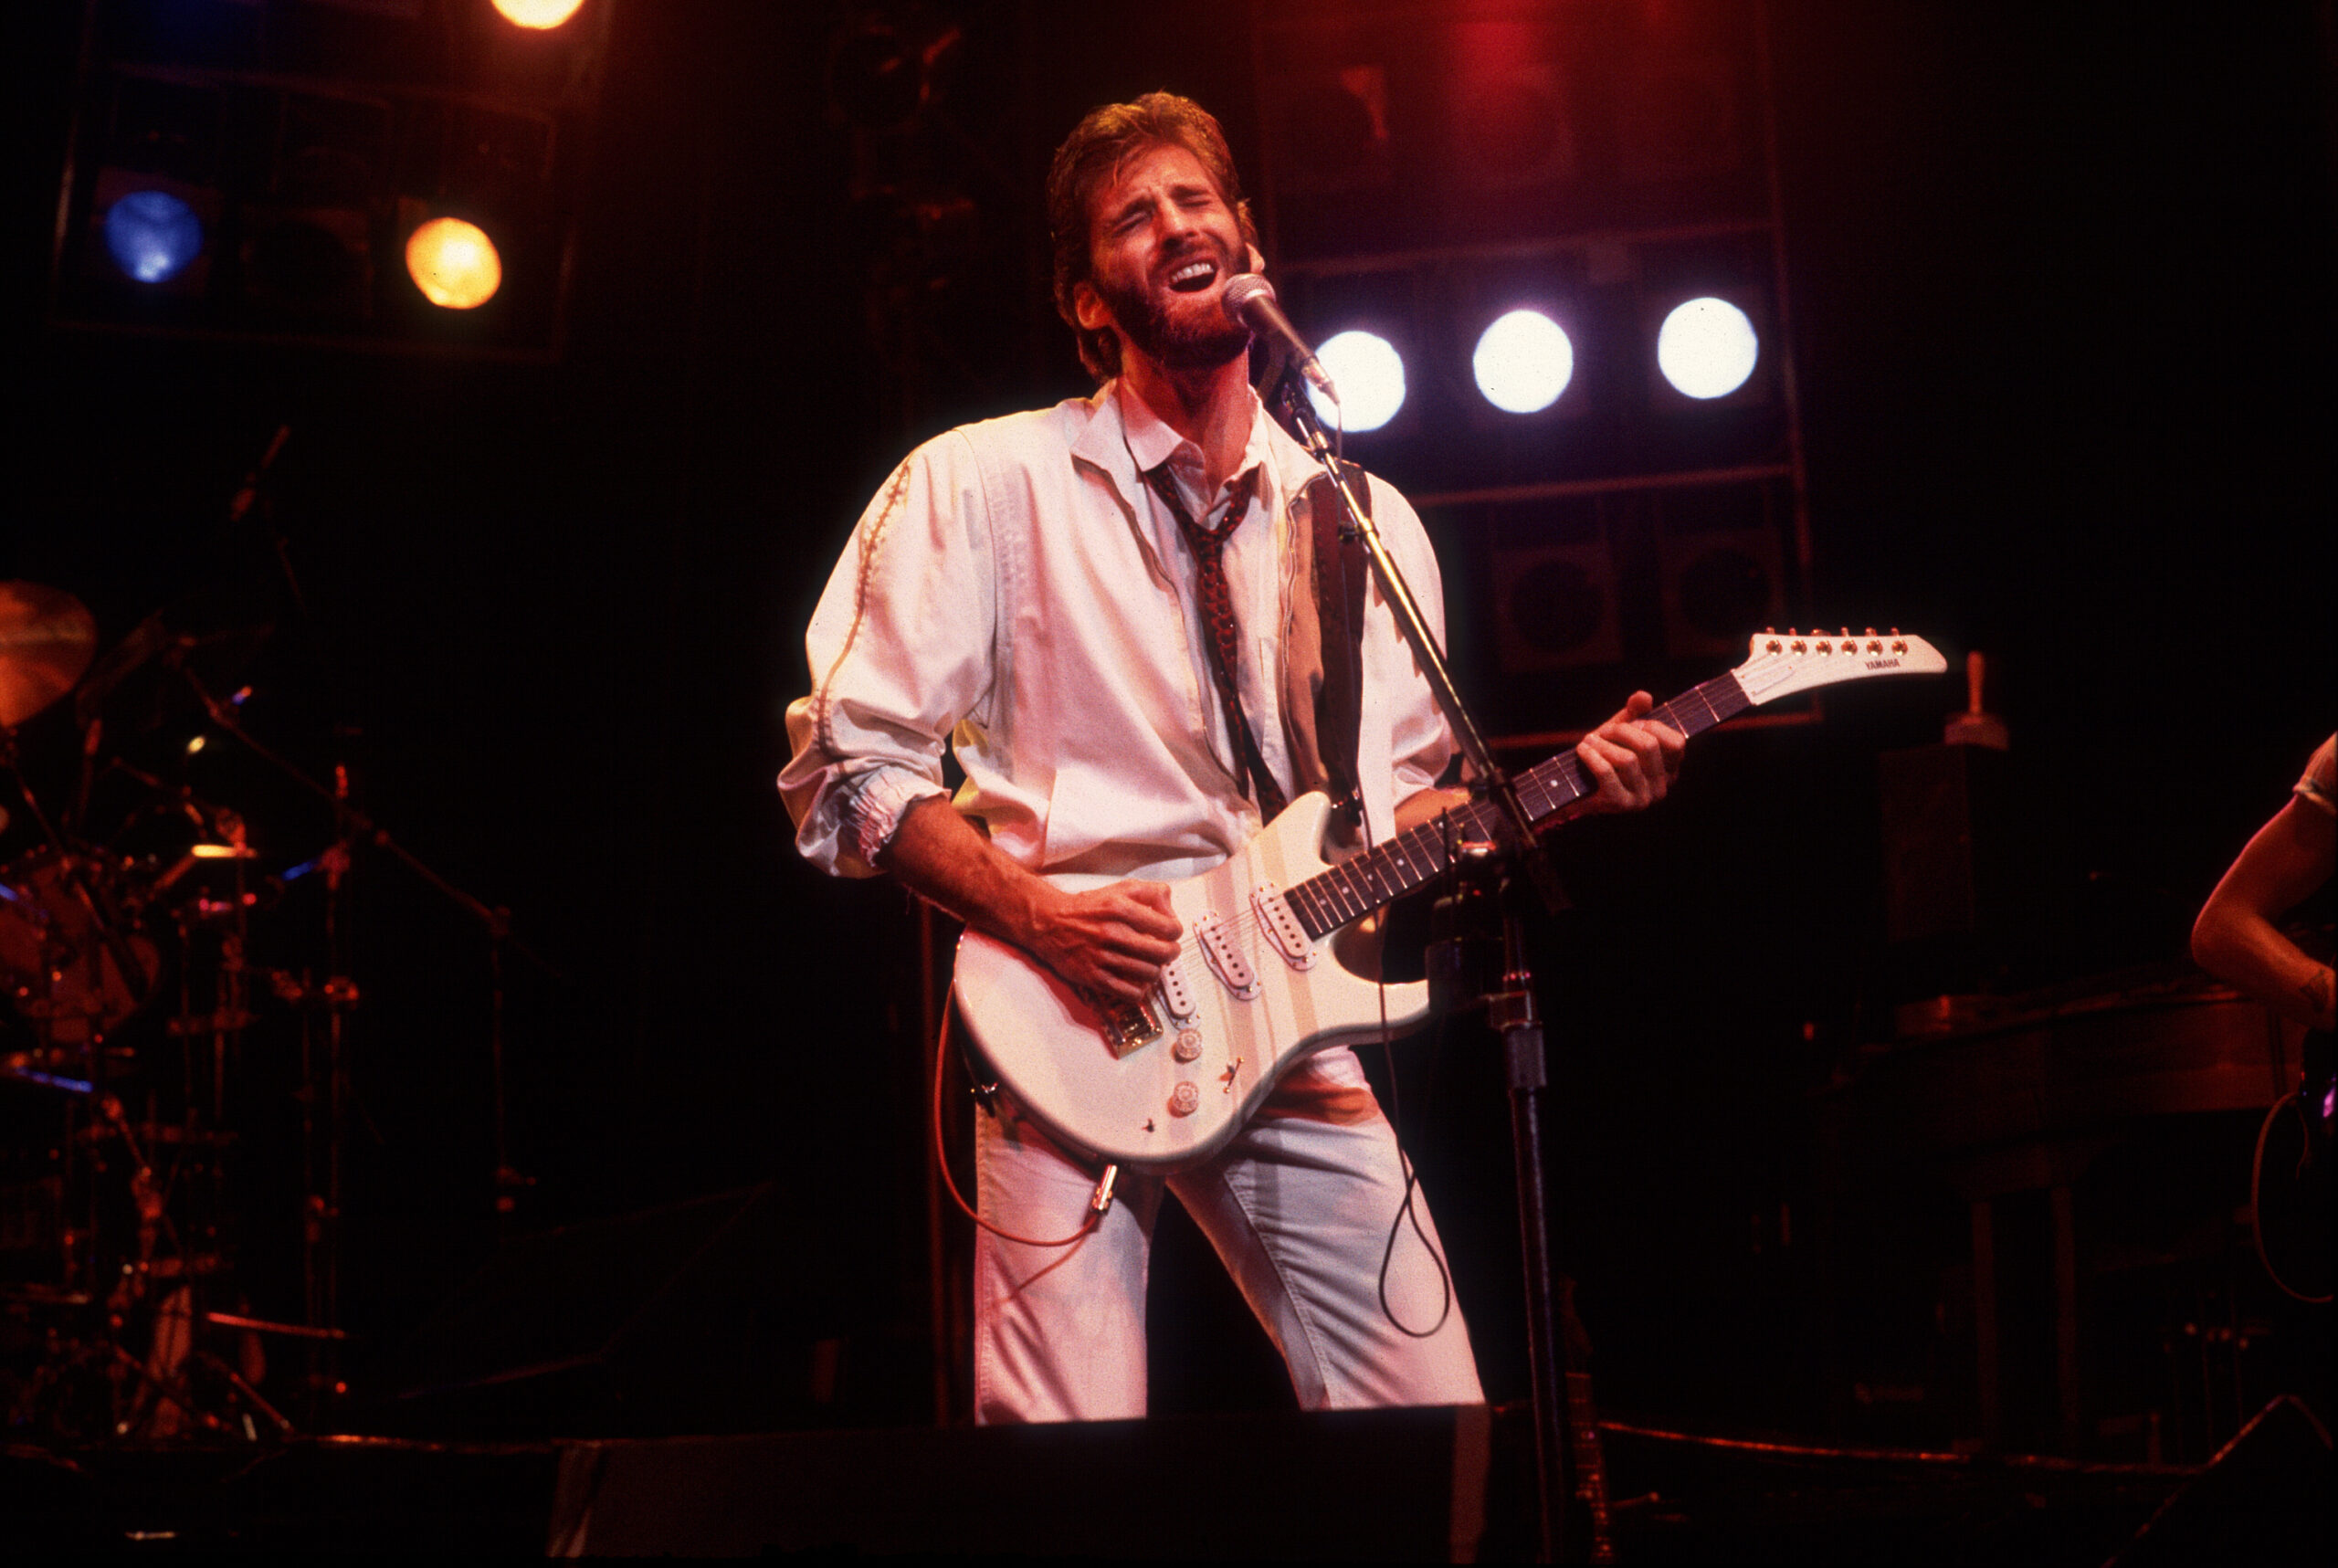 Kenny Loggins on stage in 1983. Photo: Paul Natkin / Getty Images